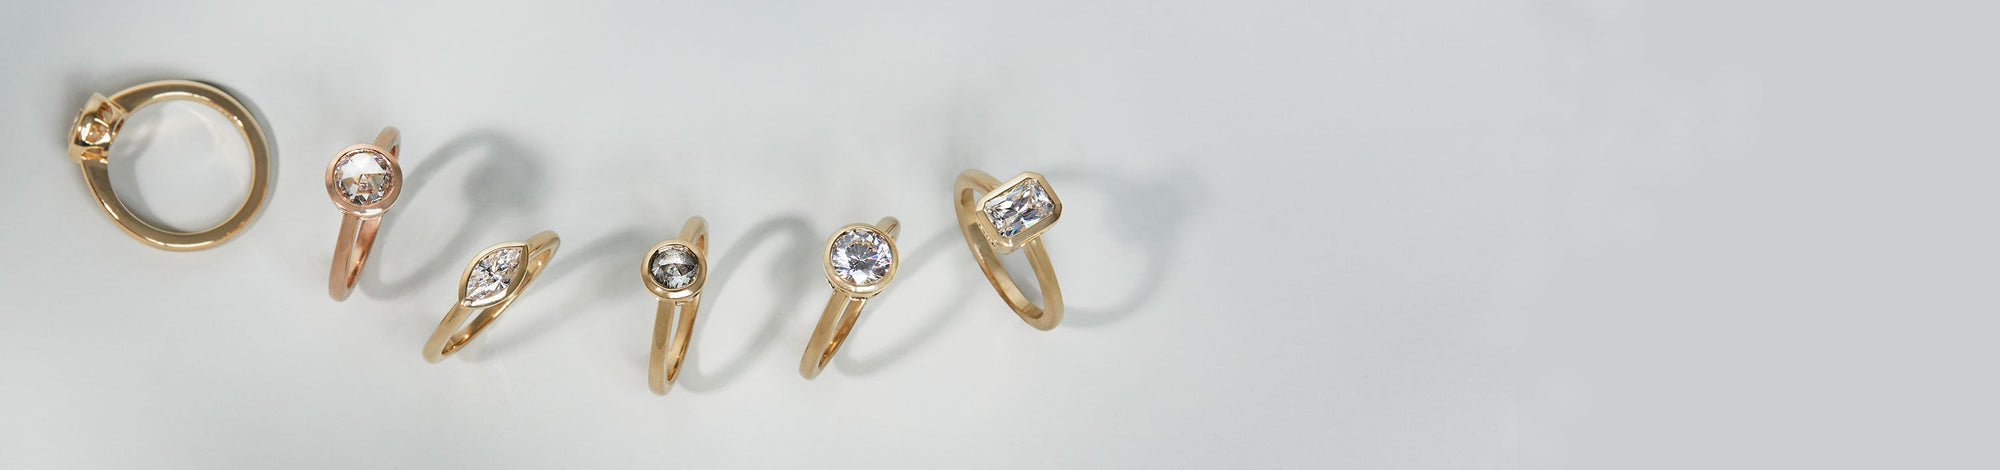 Six engagement rings with bezel set diamonds in round, marquise, and elongated shapes on a grey background.